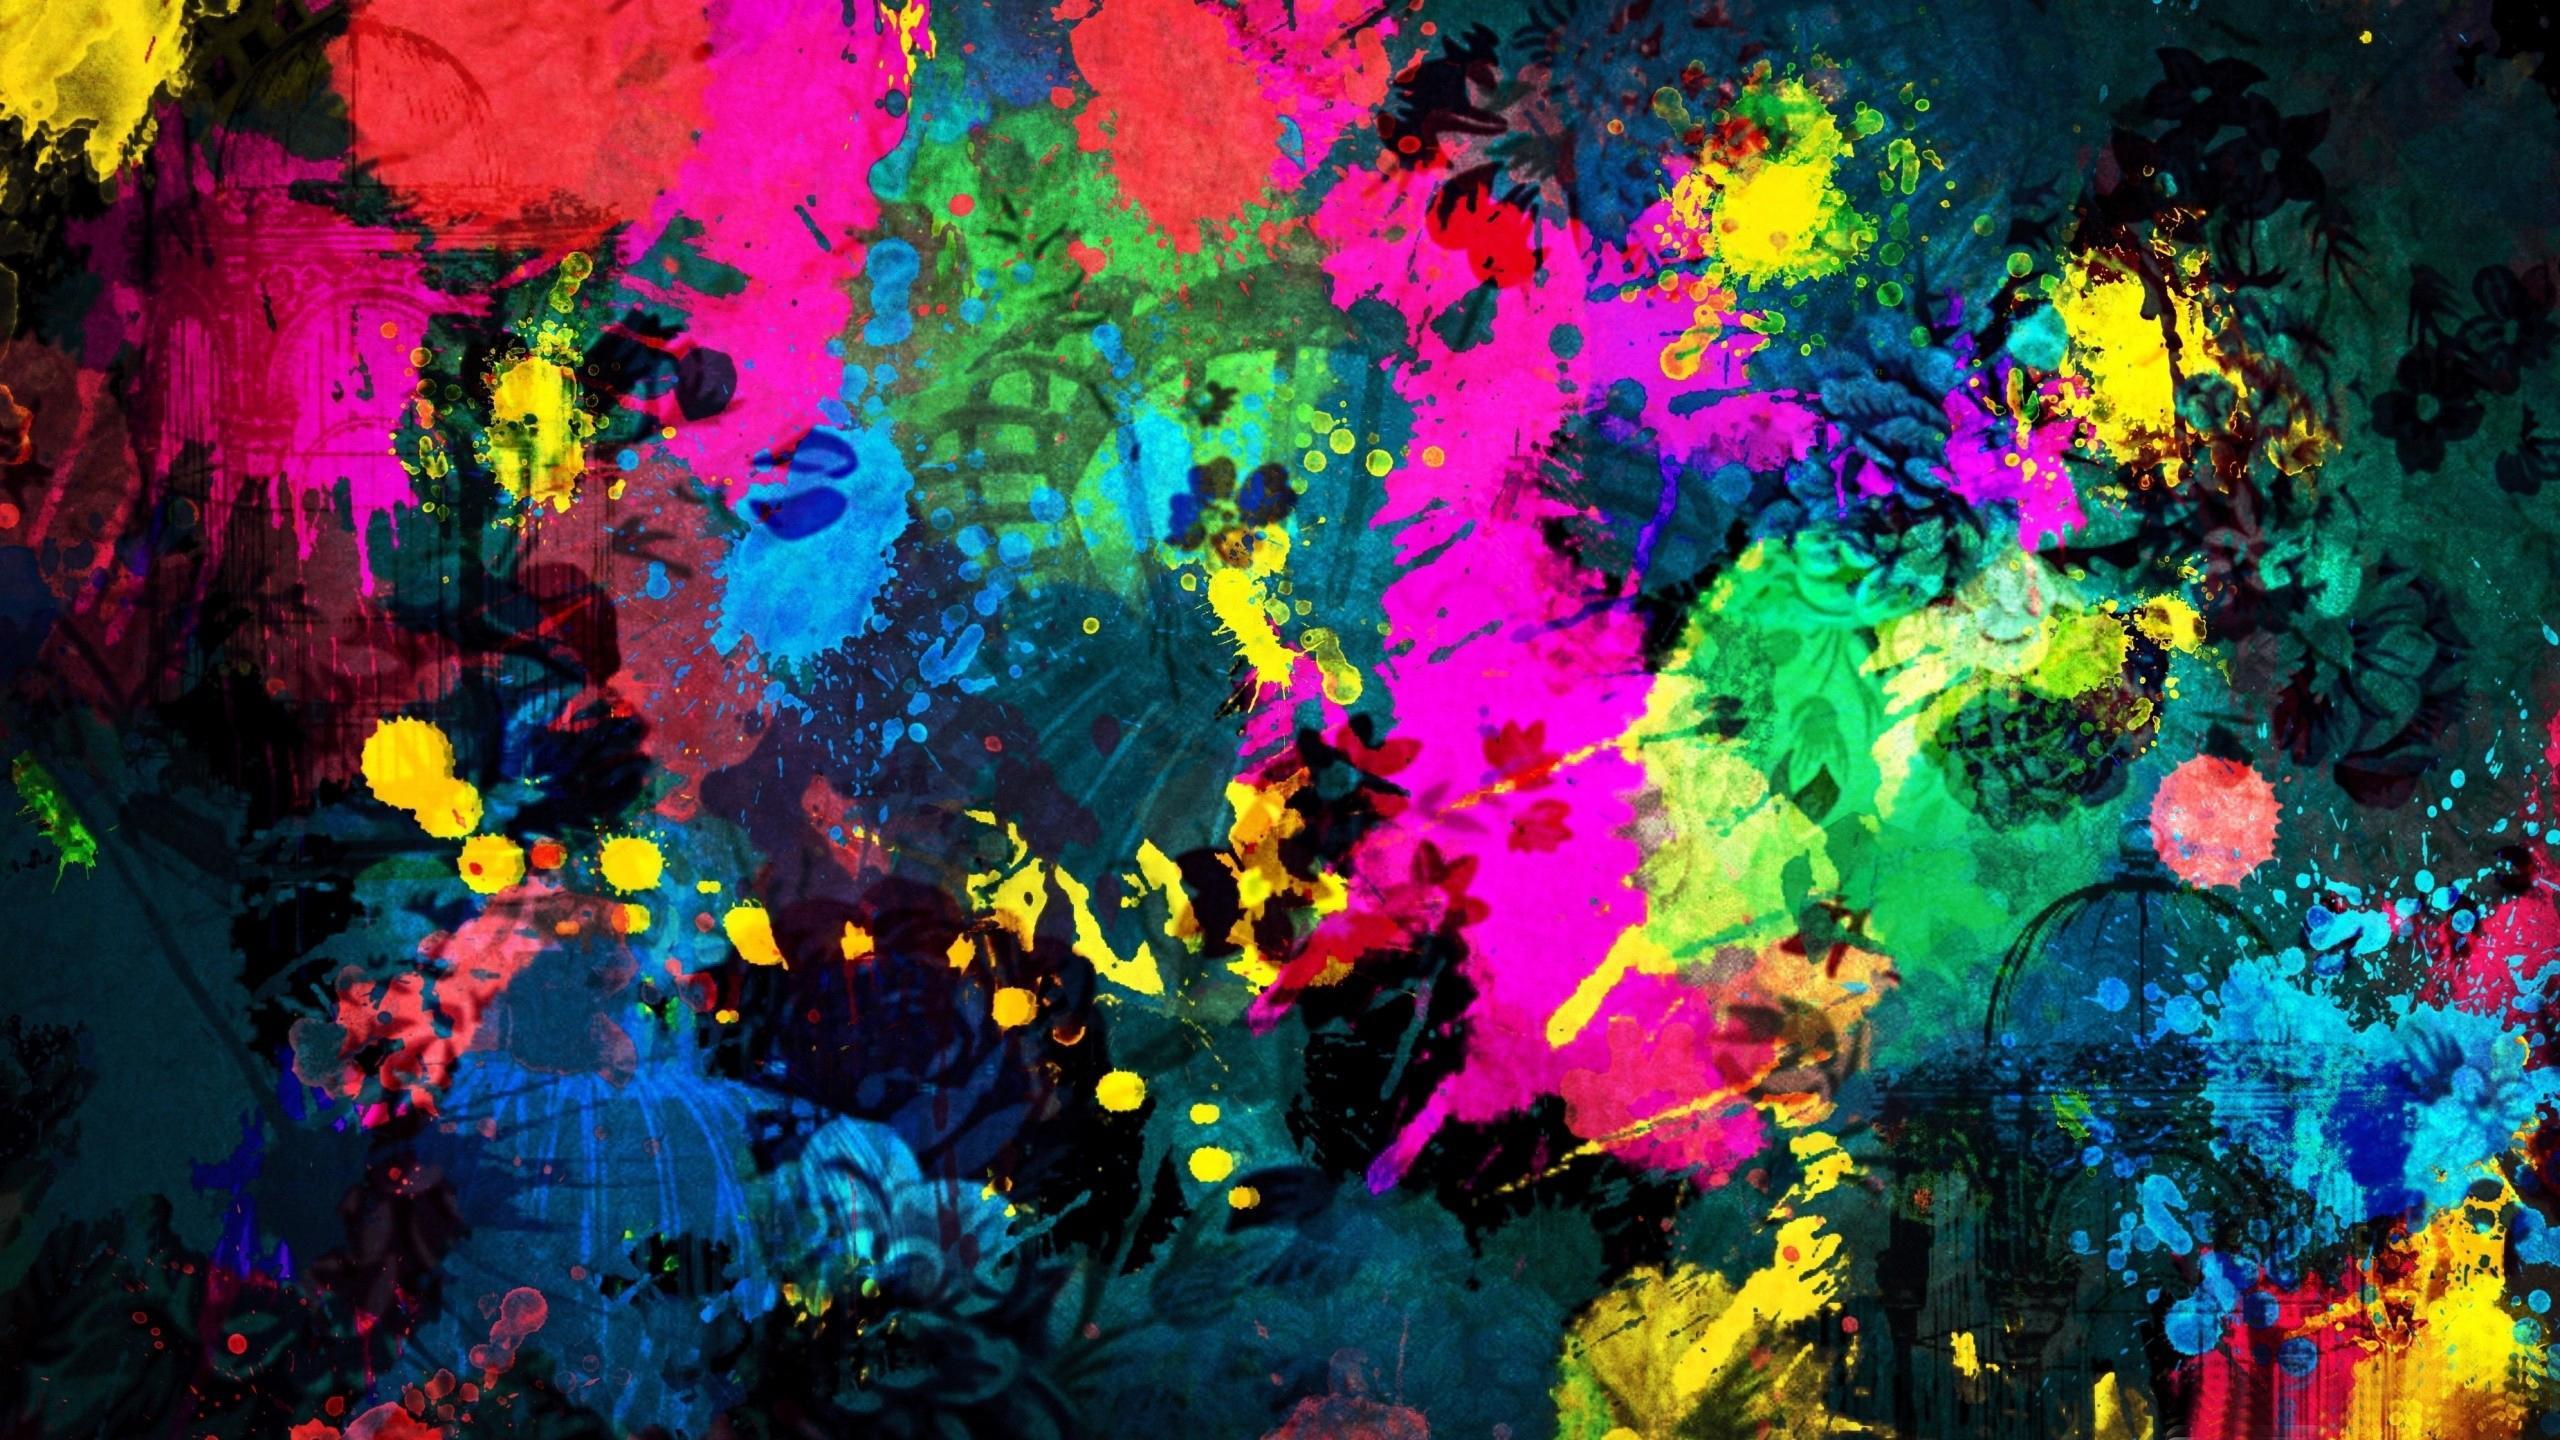 Free photo: Colorful Paint Abstract, Palette